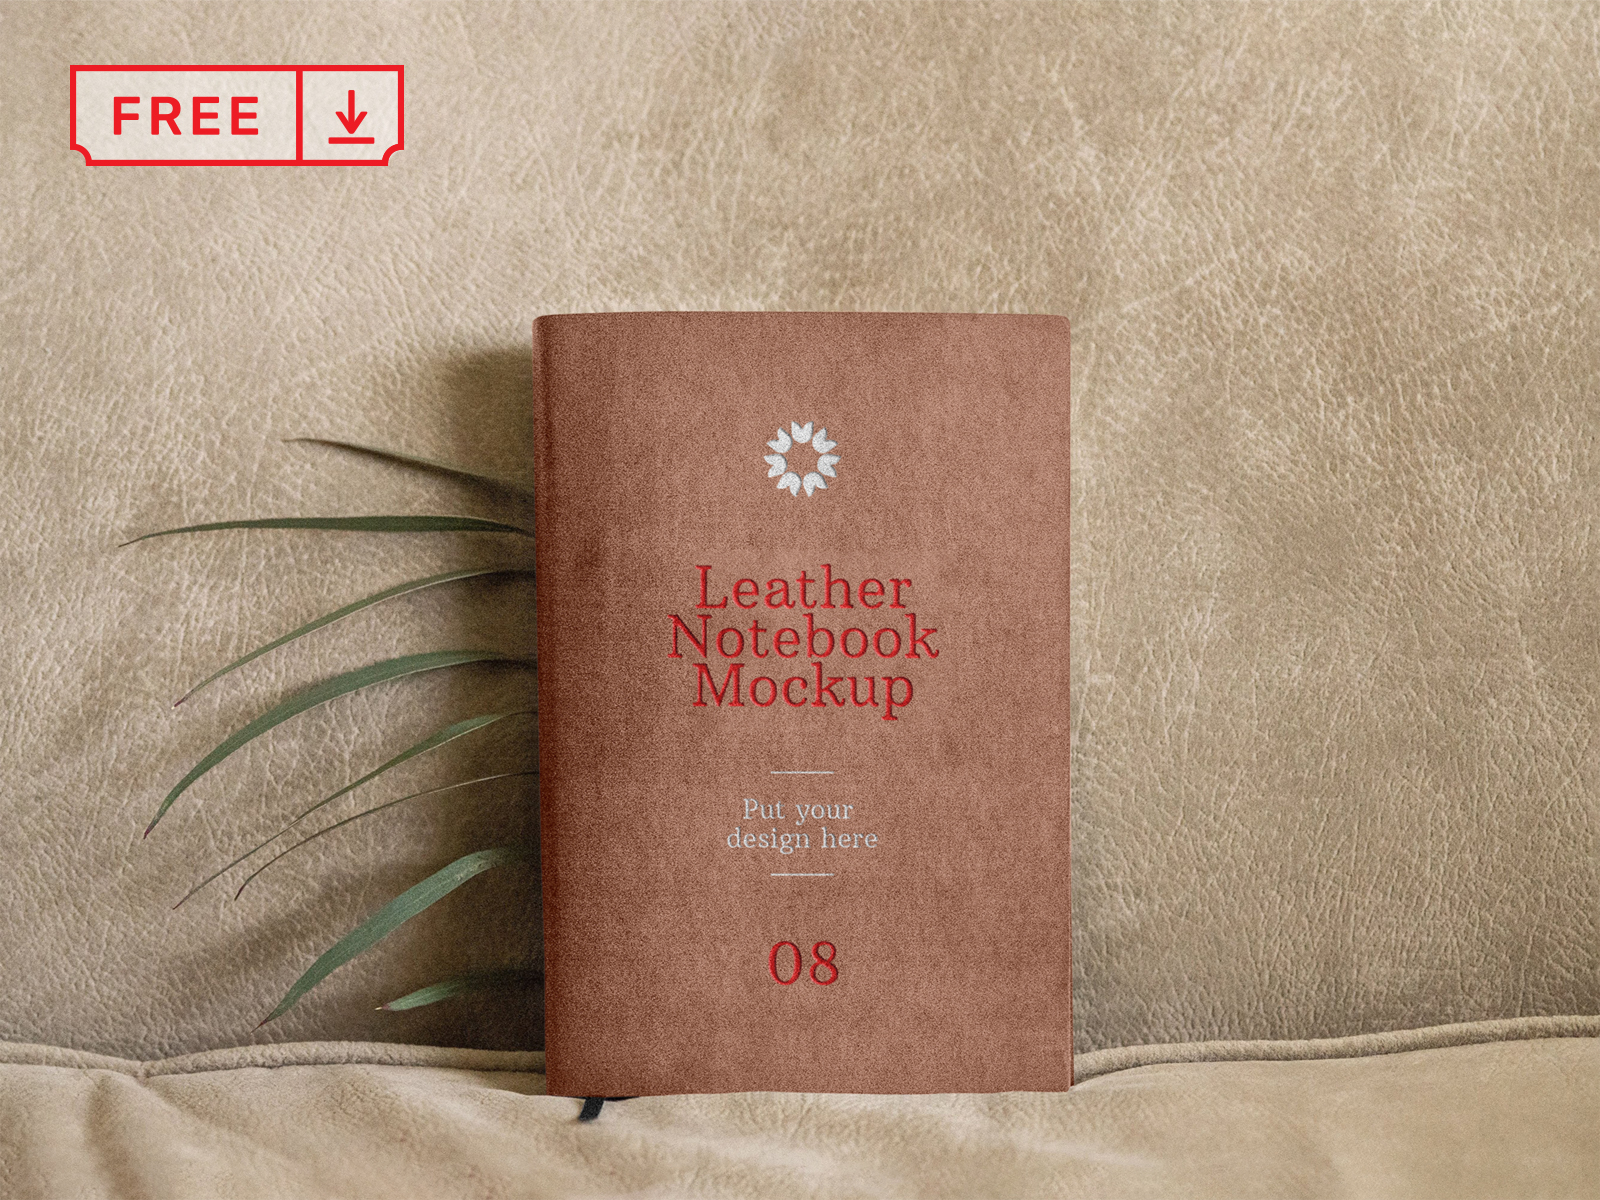 Download Free Leather Notebook Mockup by Mr.Mockup™ on Dribbble